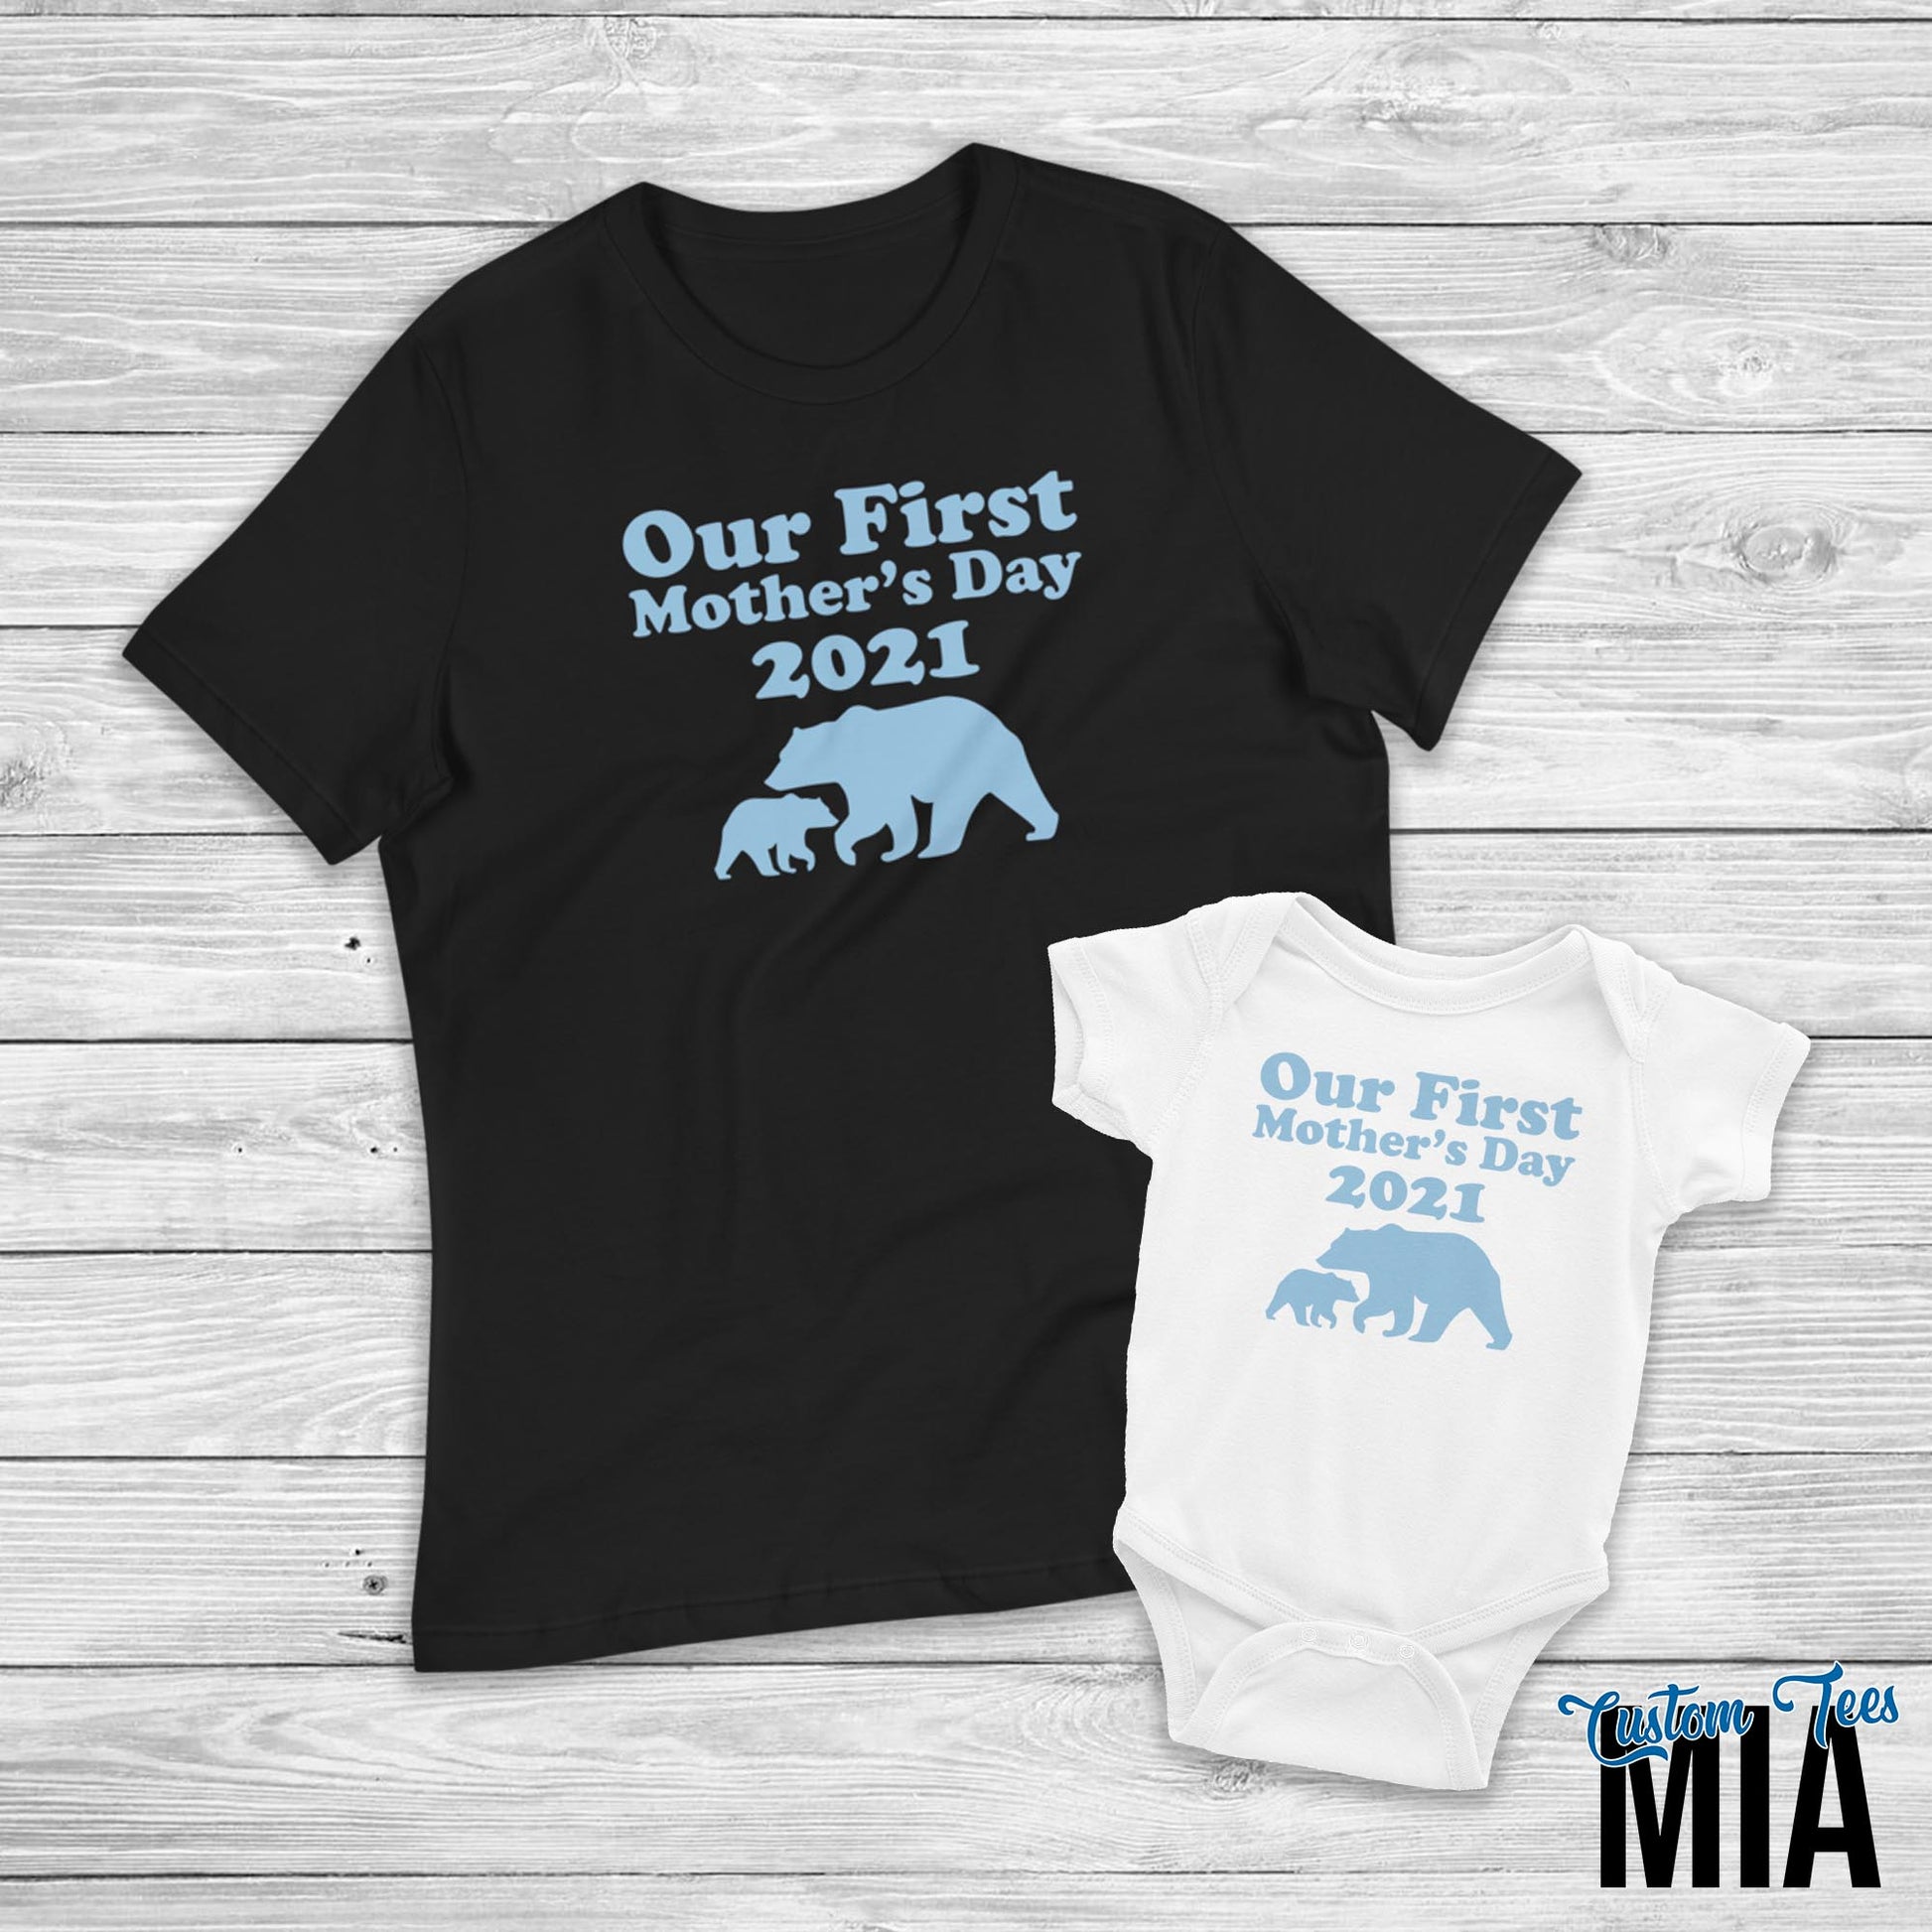 Our First Mother's Day 2021 Mommy and Me Shirt - Custom Tees MIA